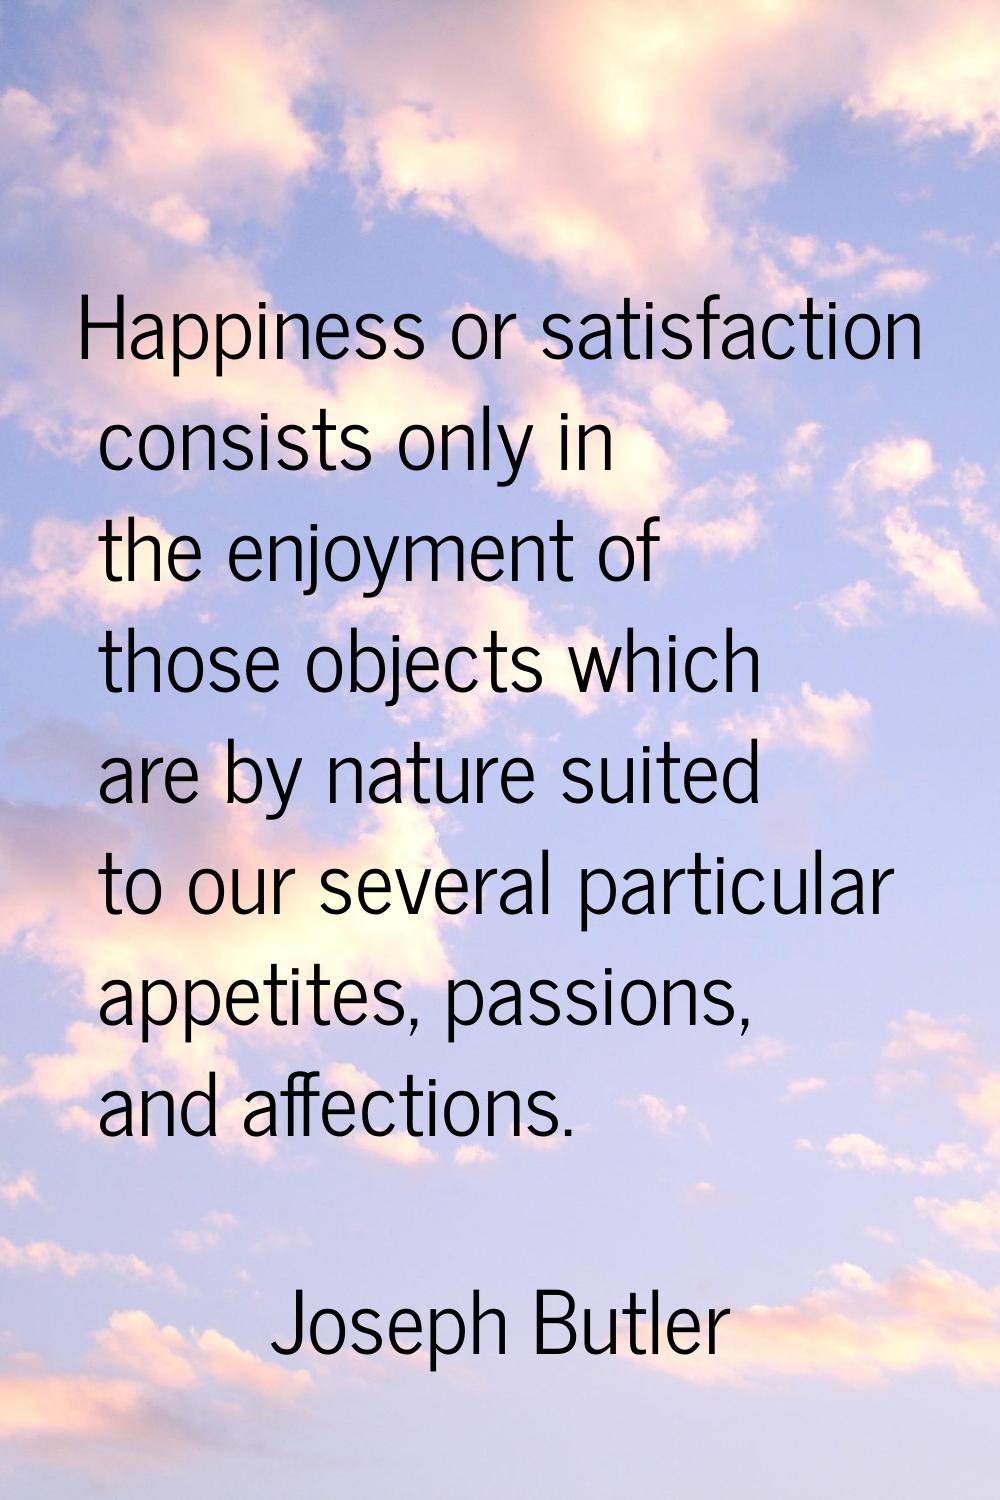 Happiness or satisfaction consists only in the enjoyment of those objects which are by nature suite